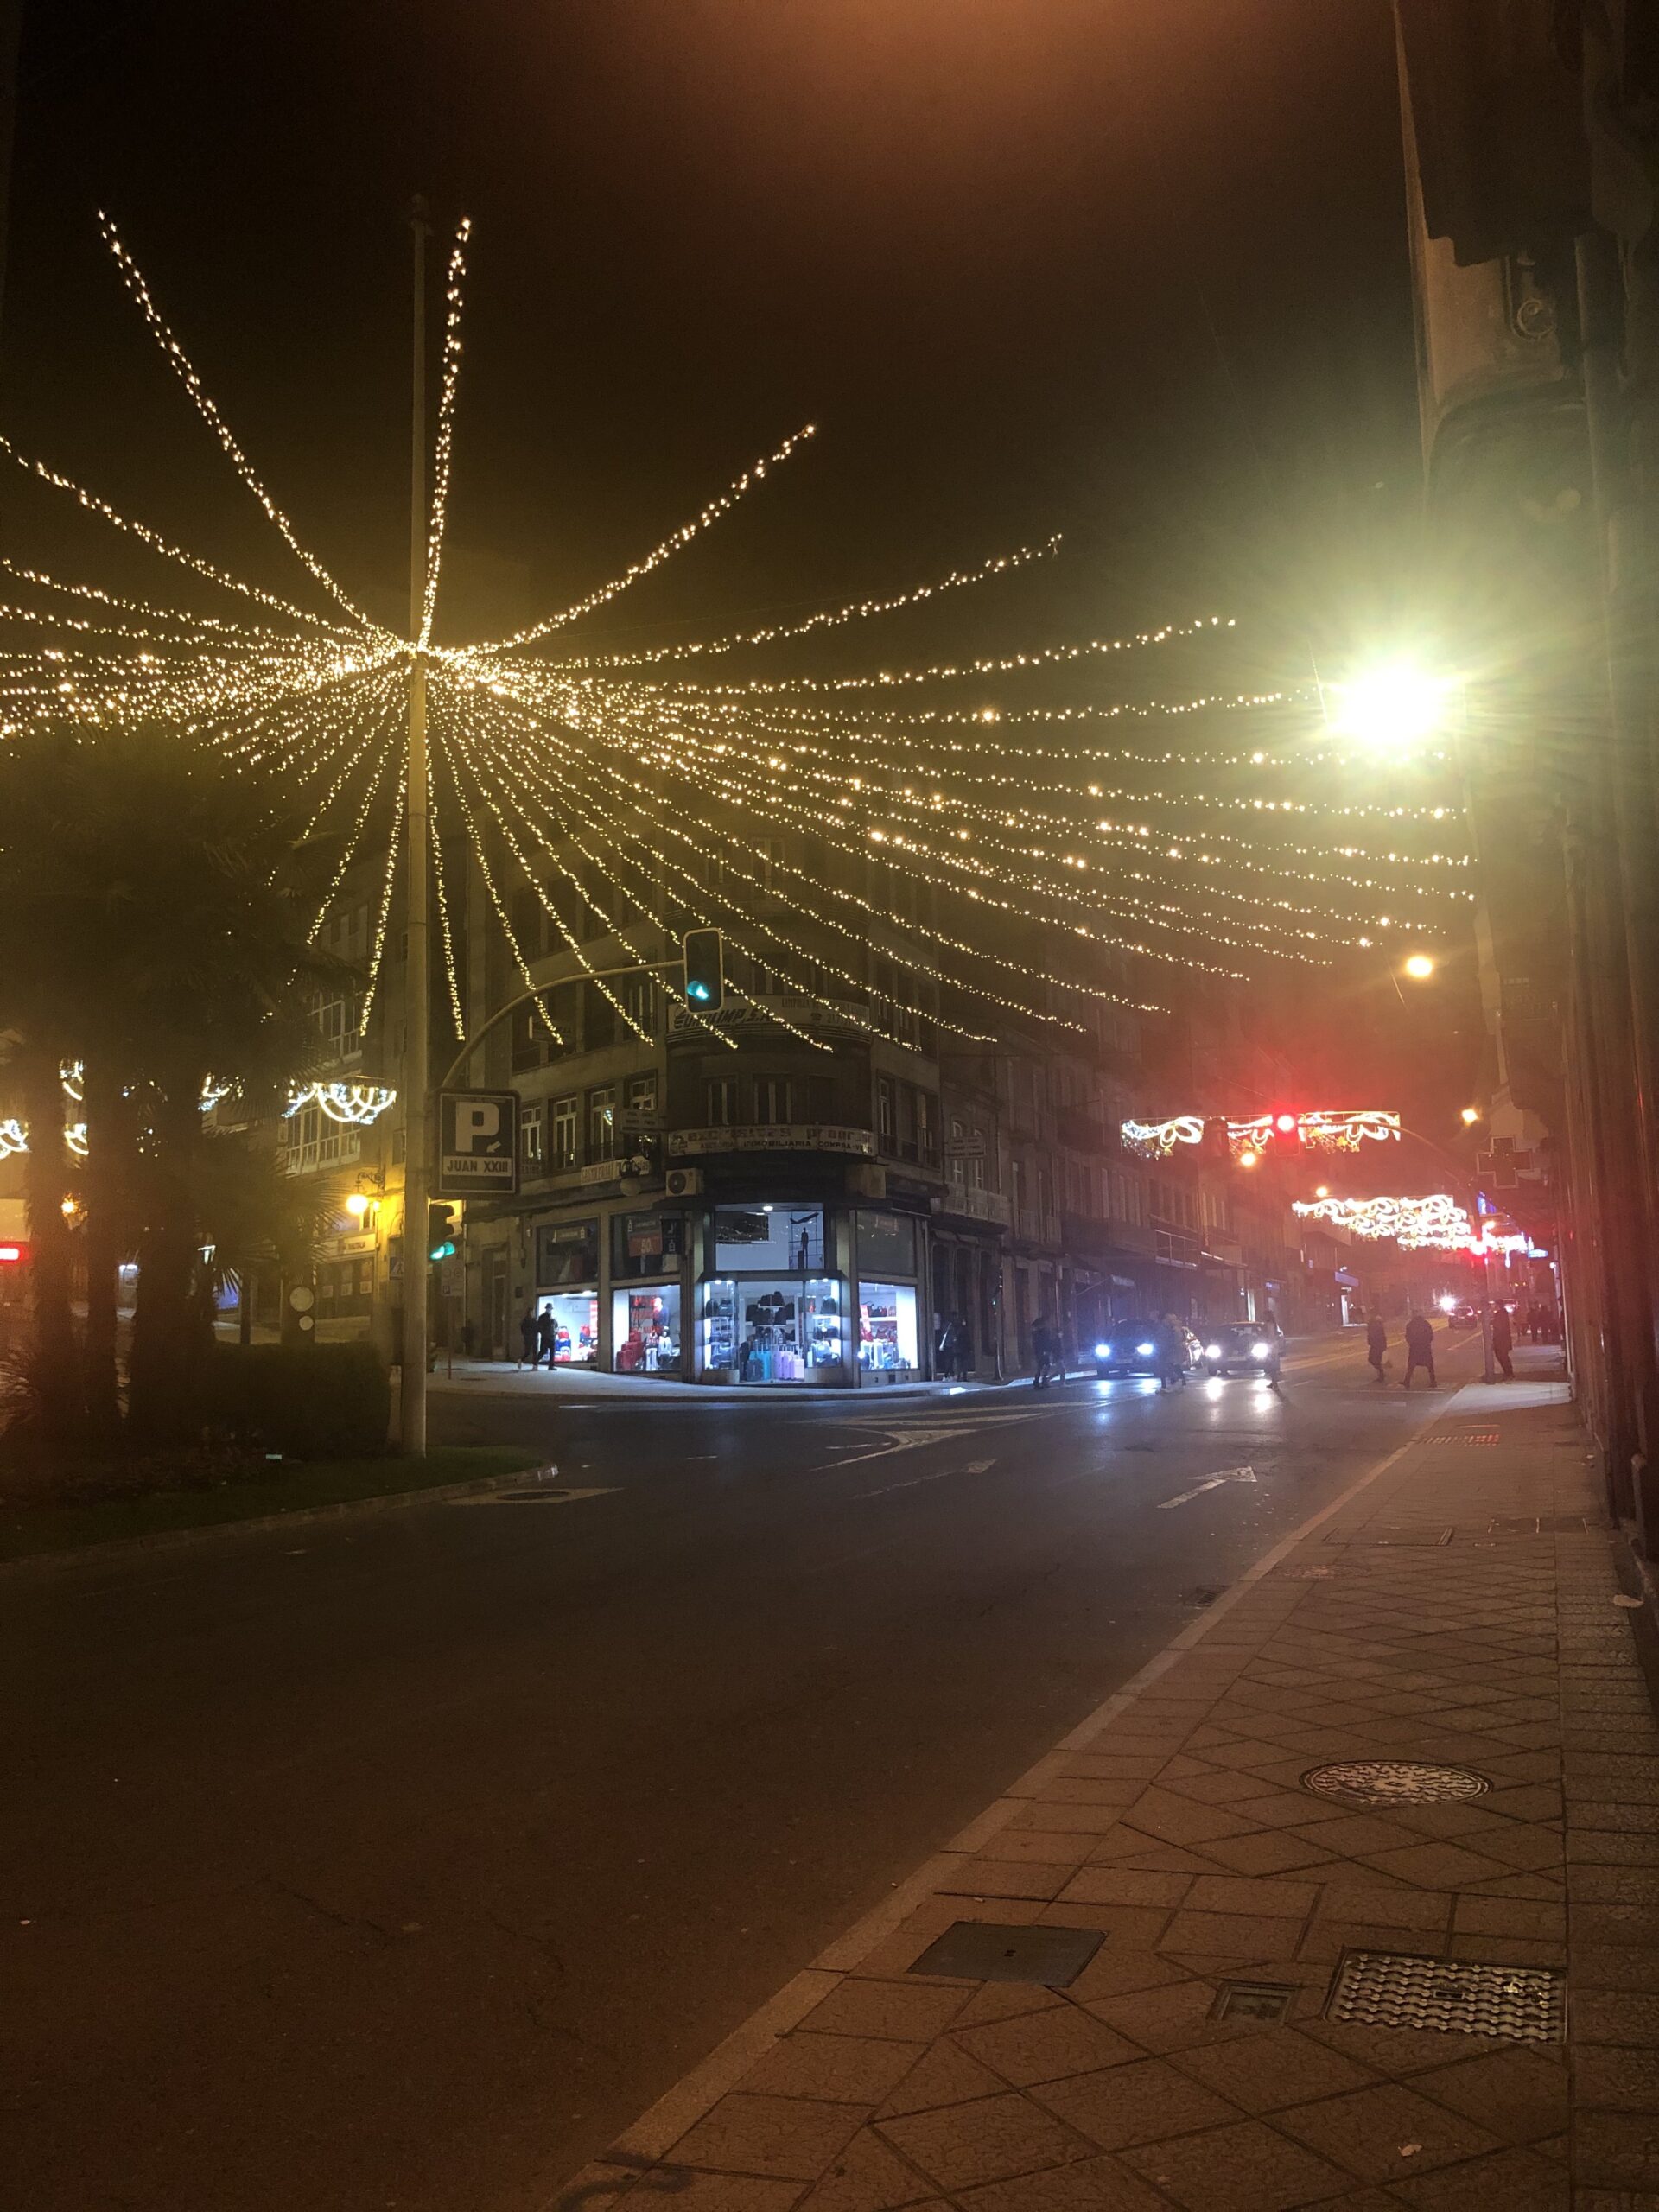 Image of Ourense, Spain. Christmas lights are hung and lit during the night